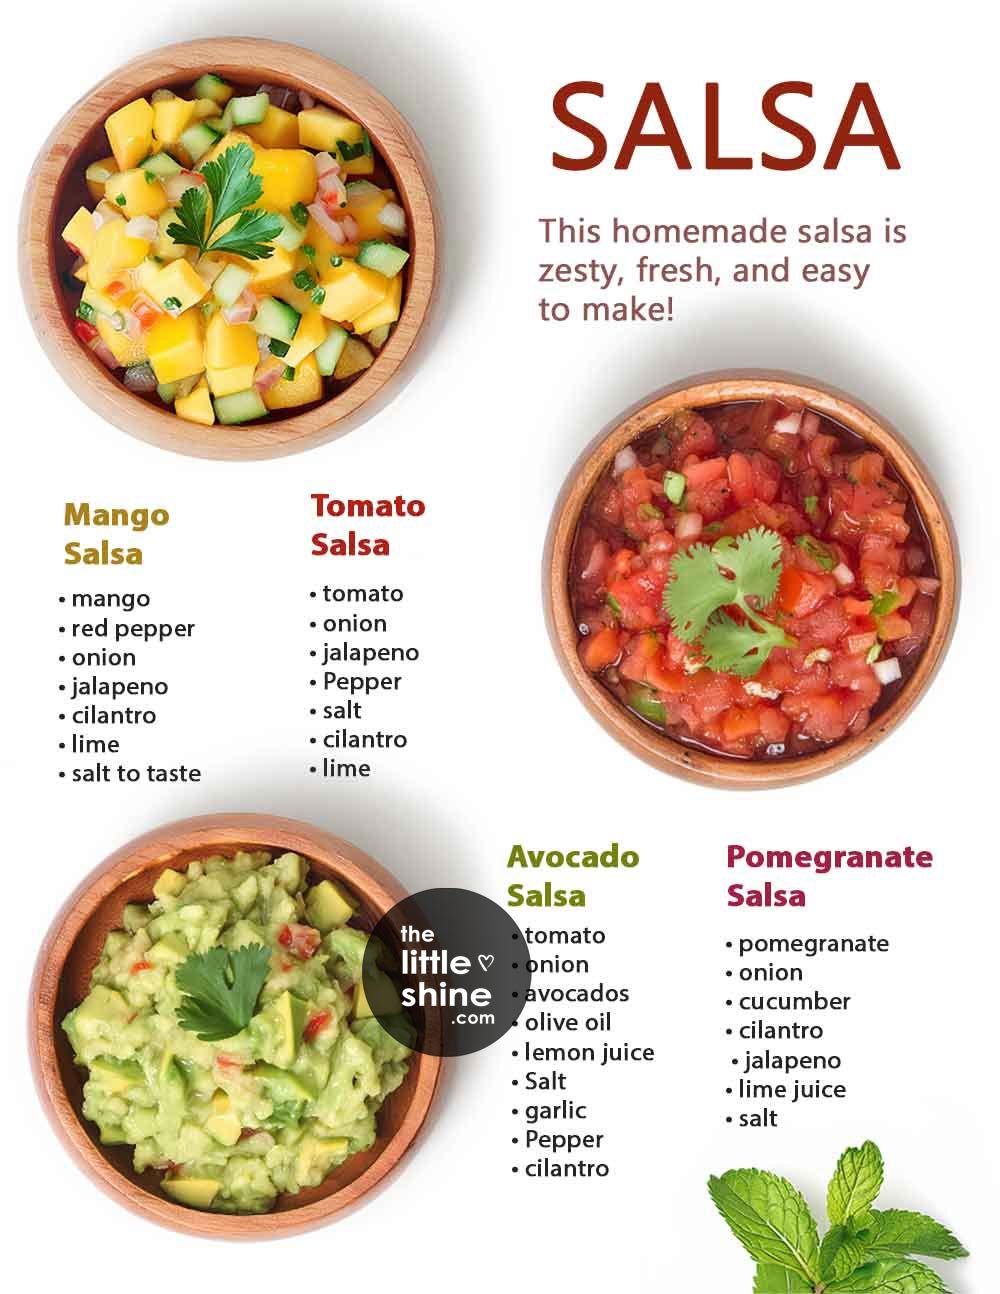 6 Easy and Delicious Salsa Recipes